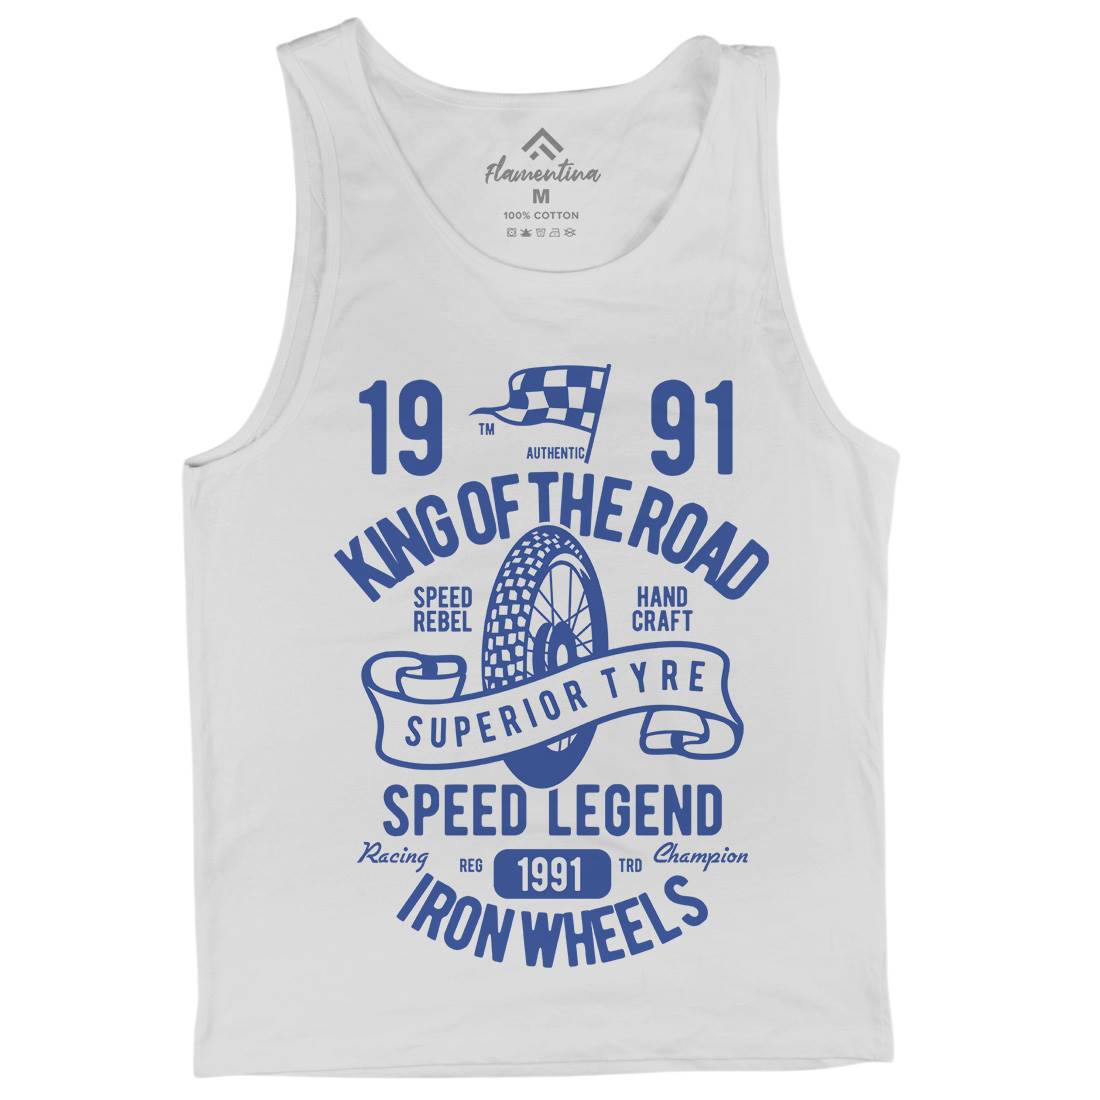 Superior Tyre King Of The Road Mens Tank Top Vest Motorcycles B458